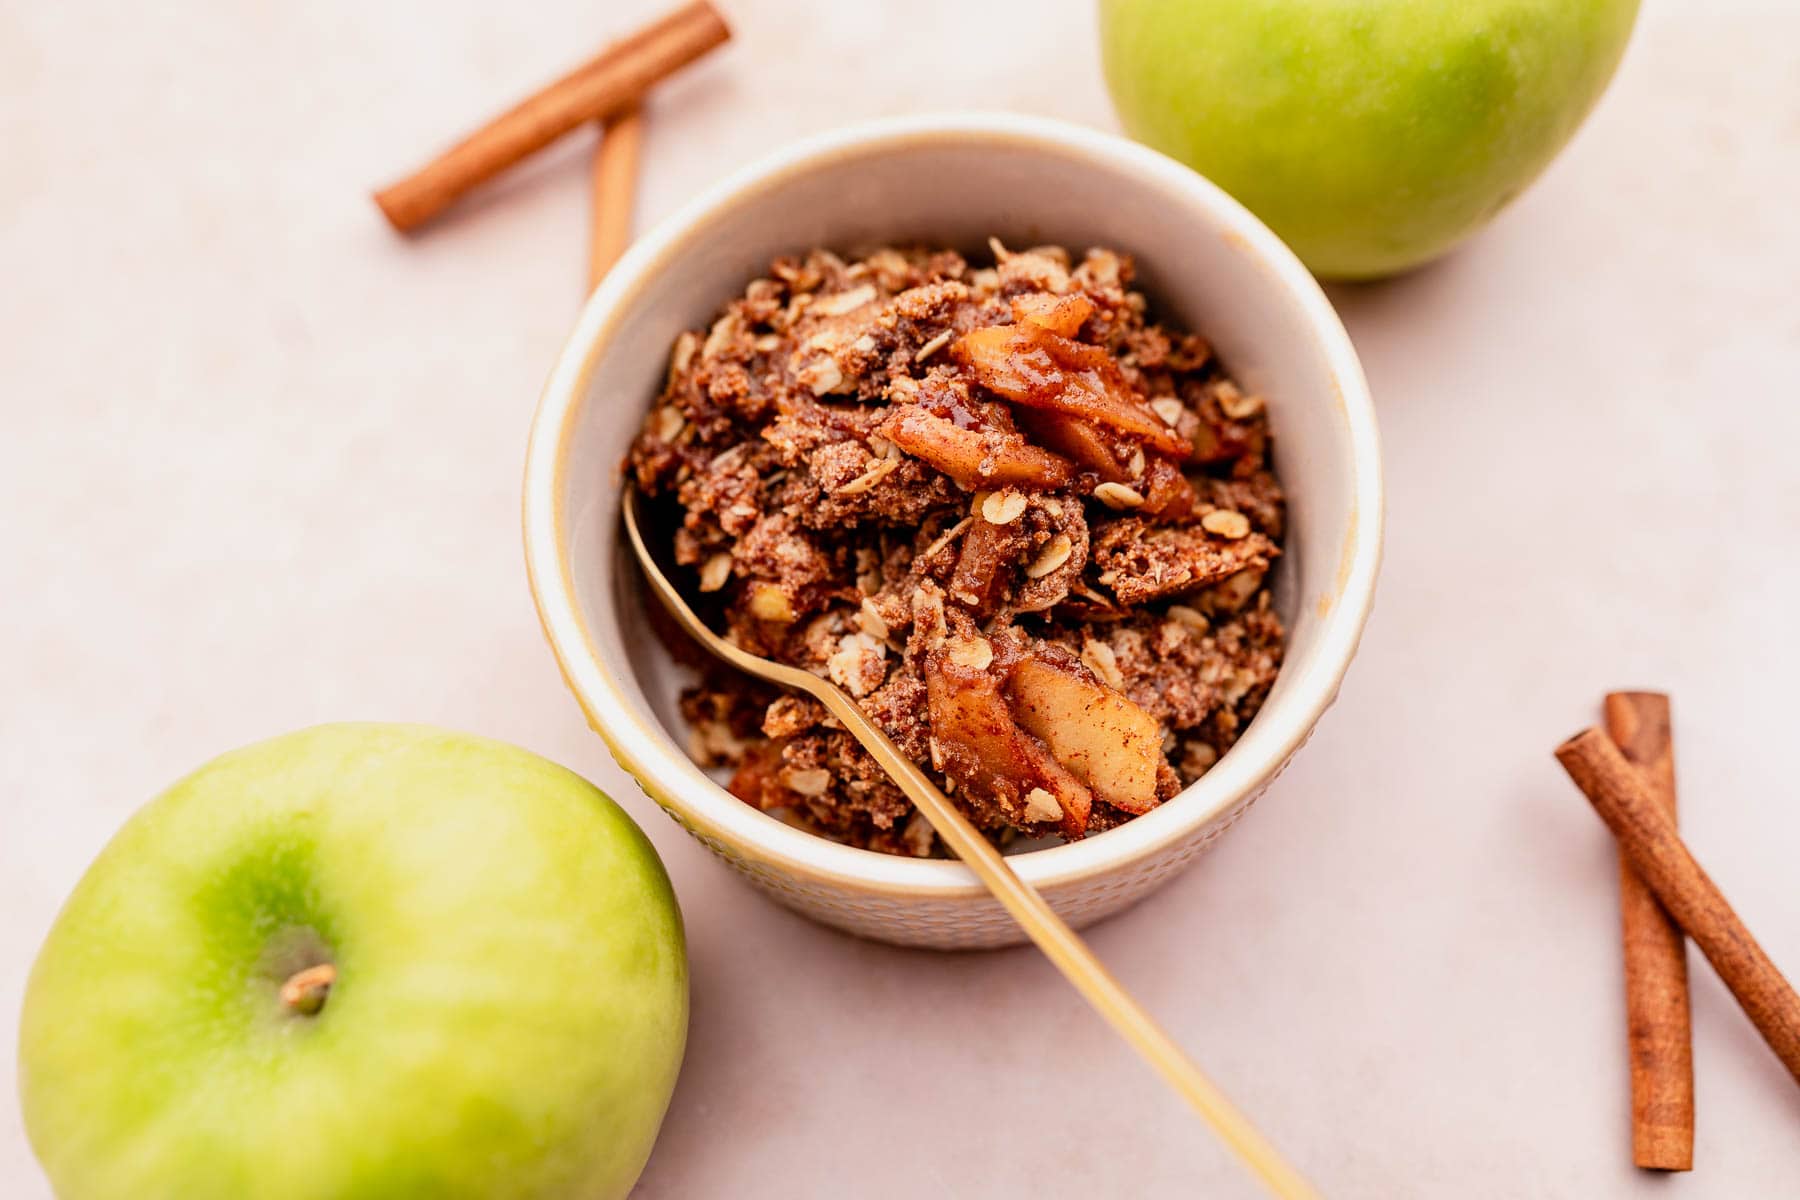 A gluten-free bowl of granola with apples and cinnamon.